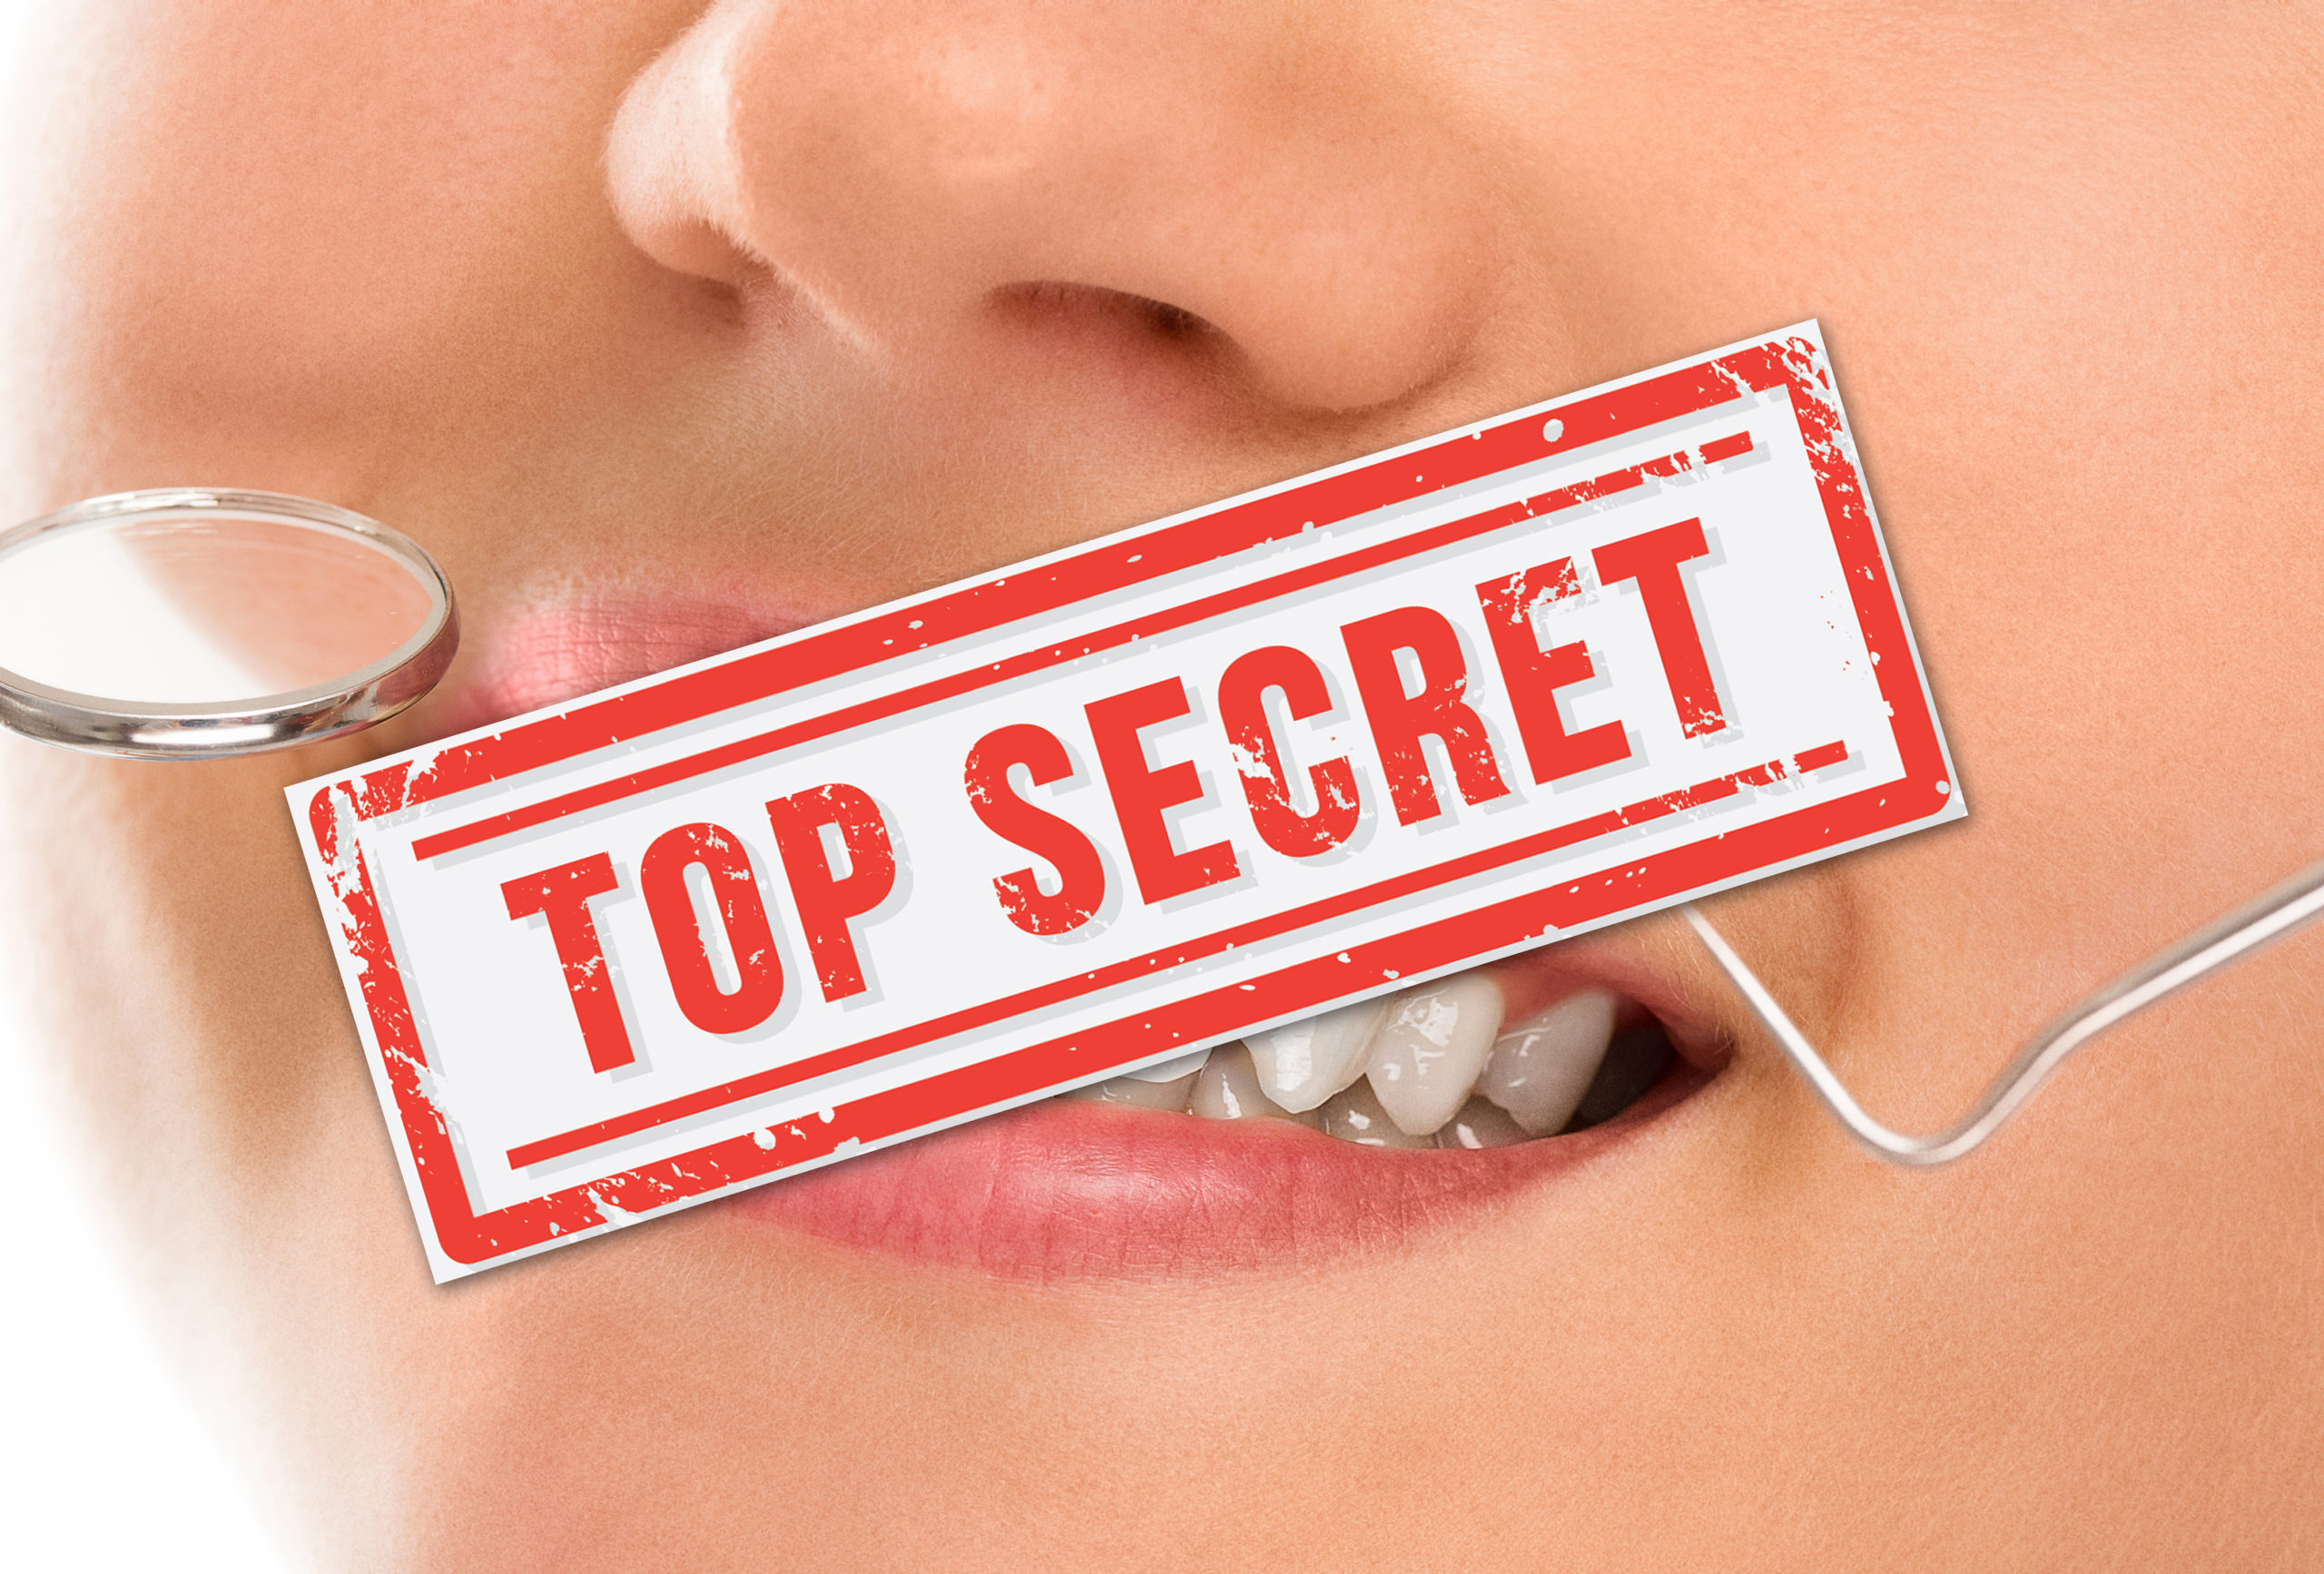 Oral Health Secrets — What Don’t You Know About Your Mouth?